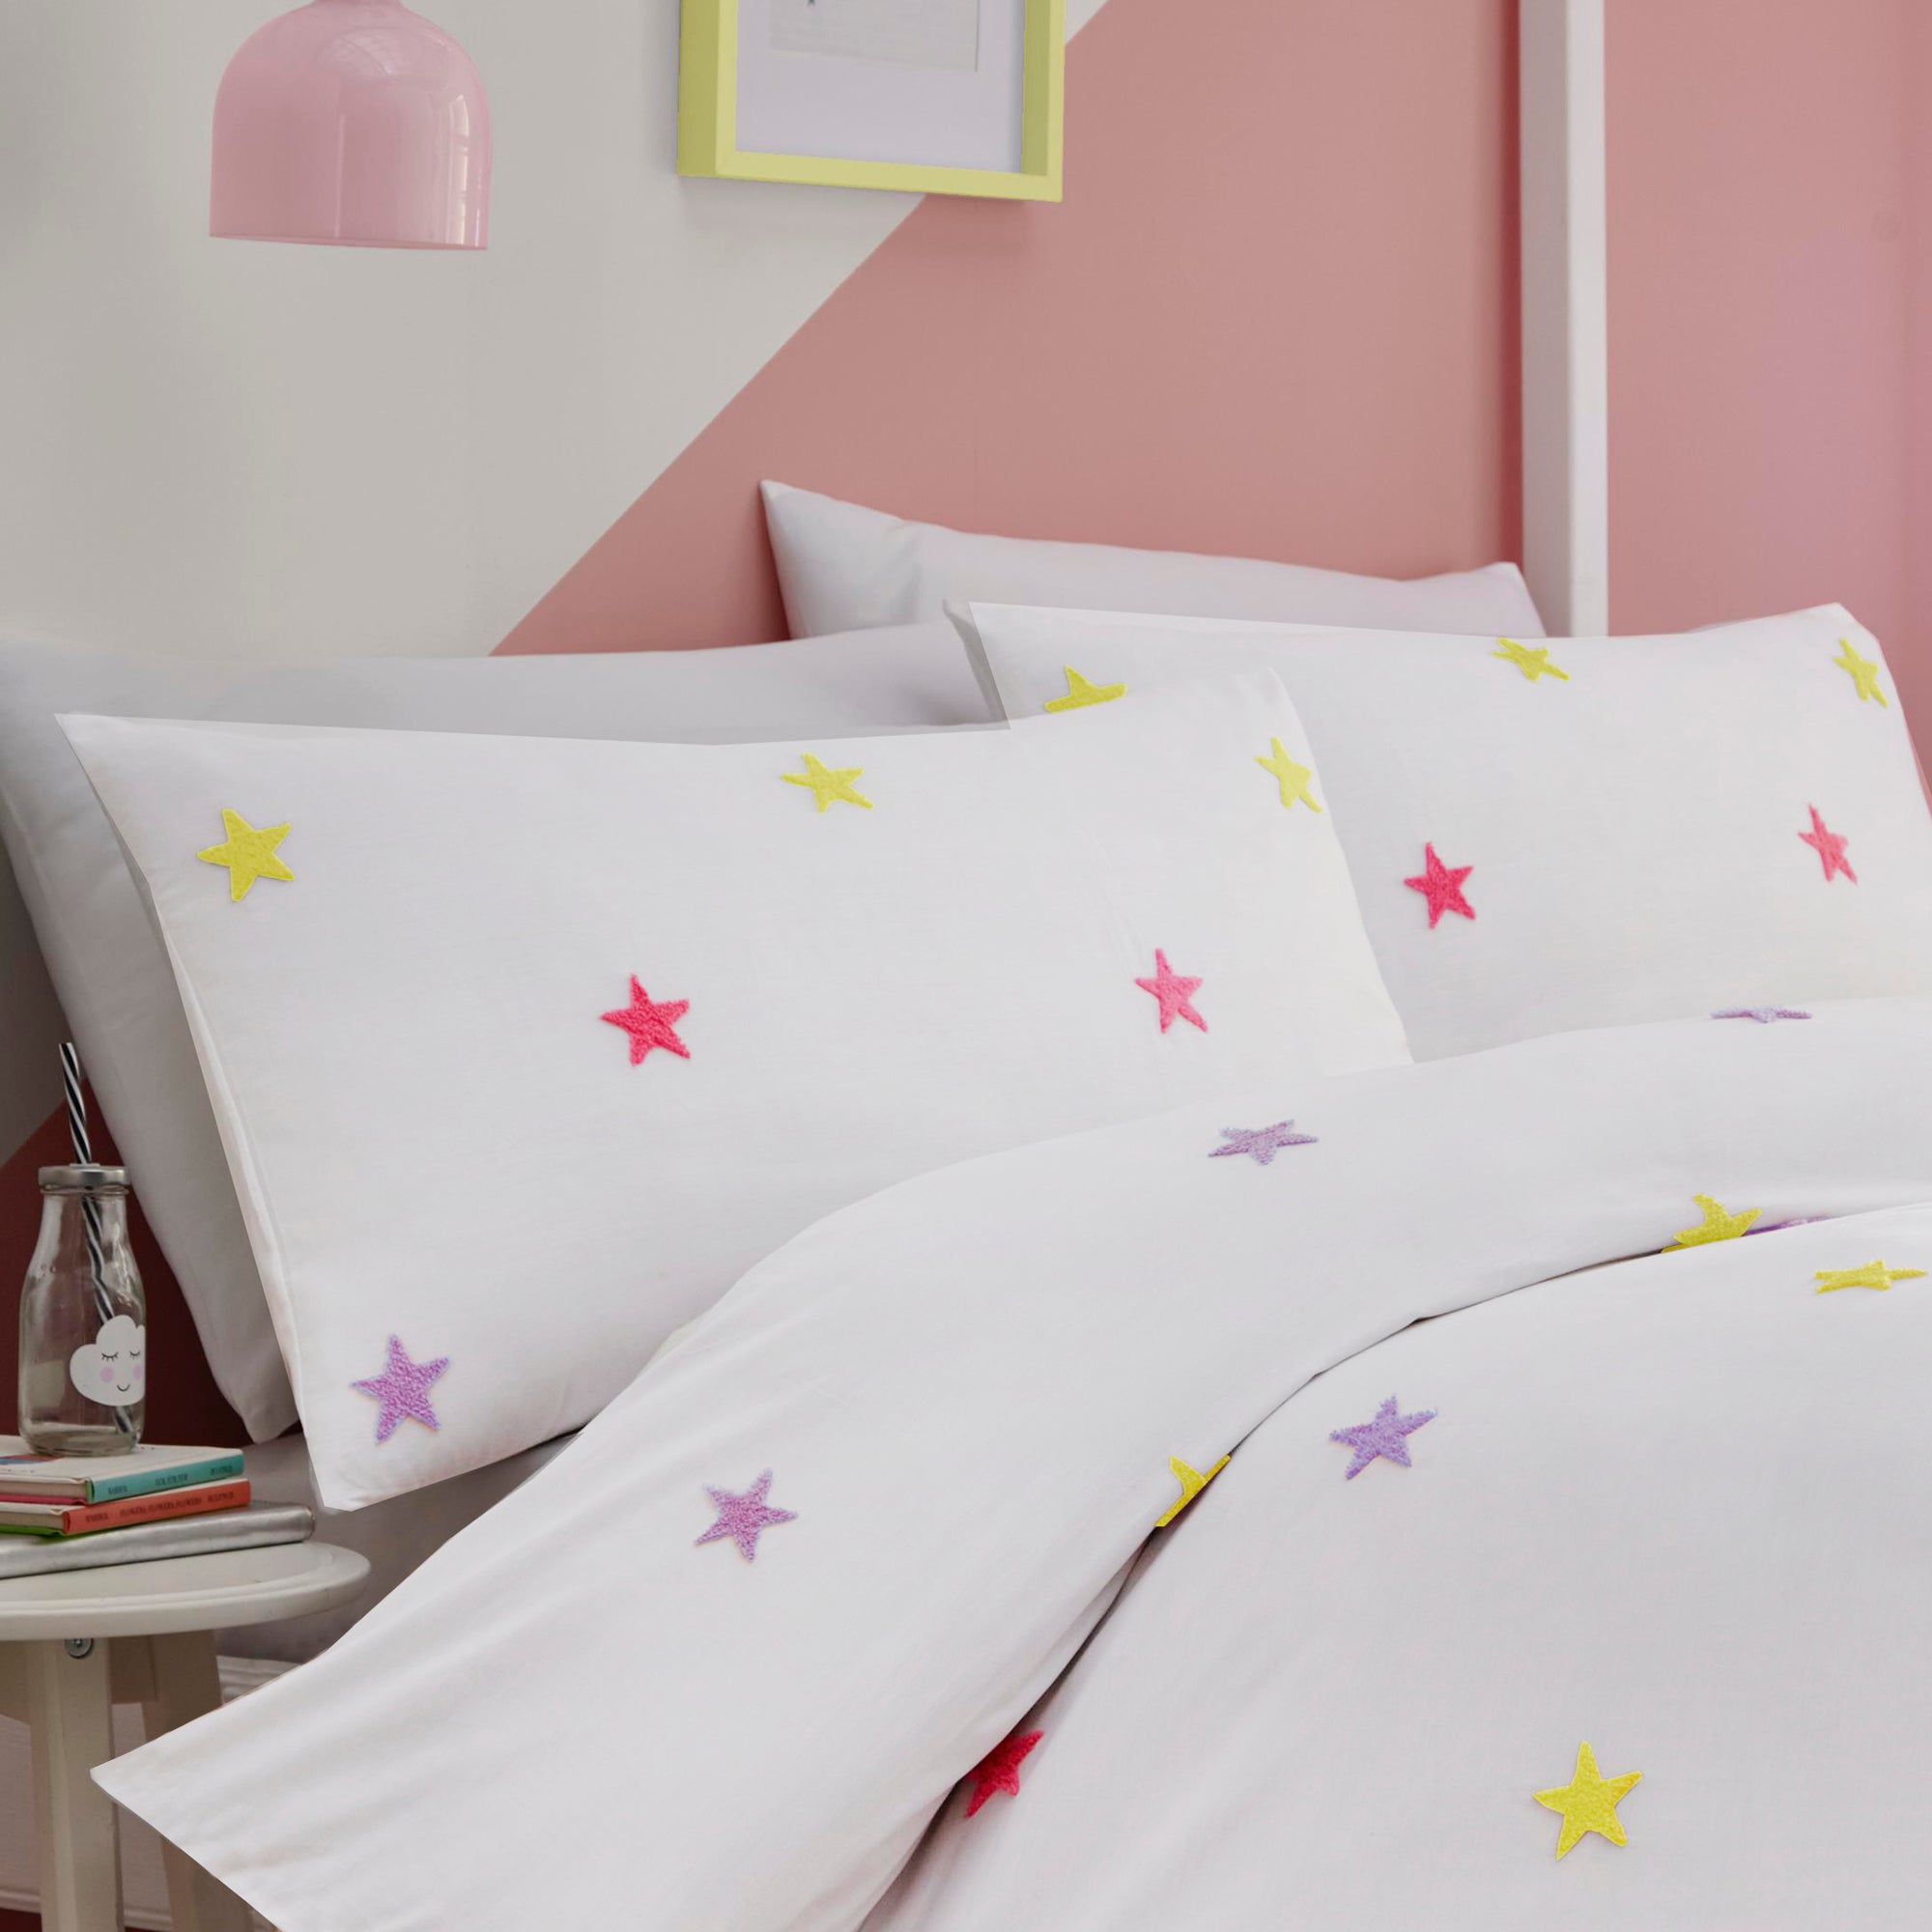 Tufted Star - 100% Cotton Duvet Cover Set in Multi - by Appletree Kids